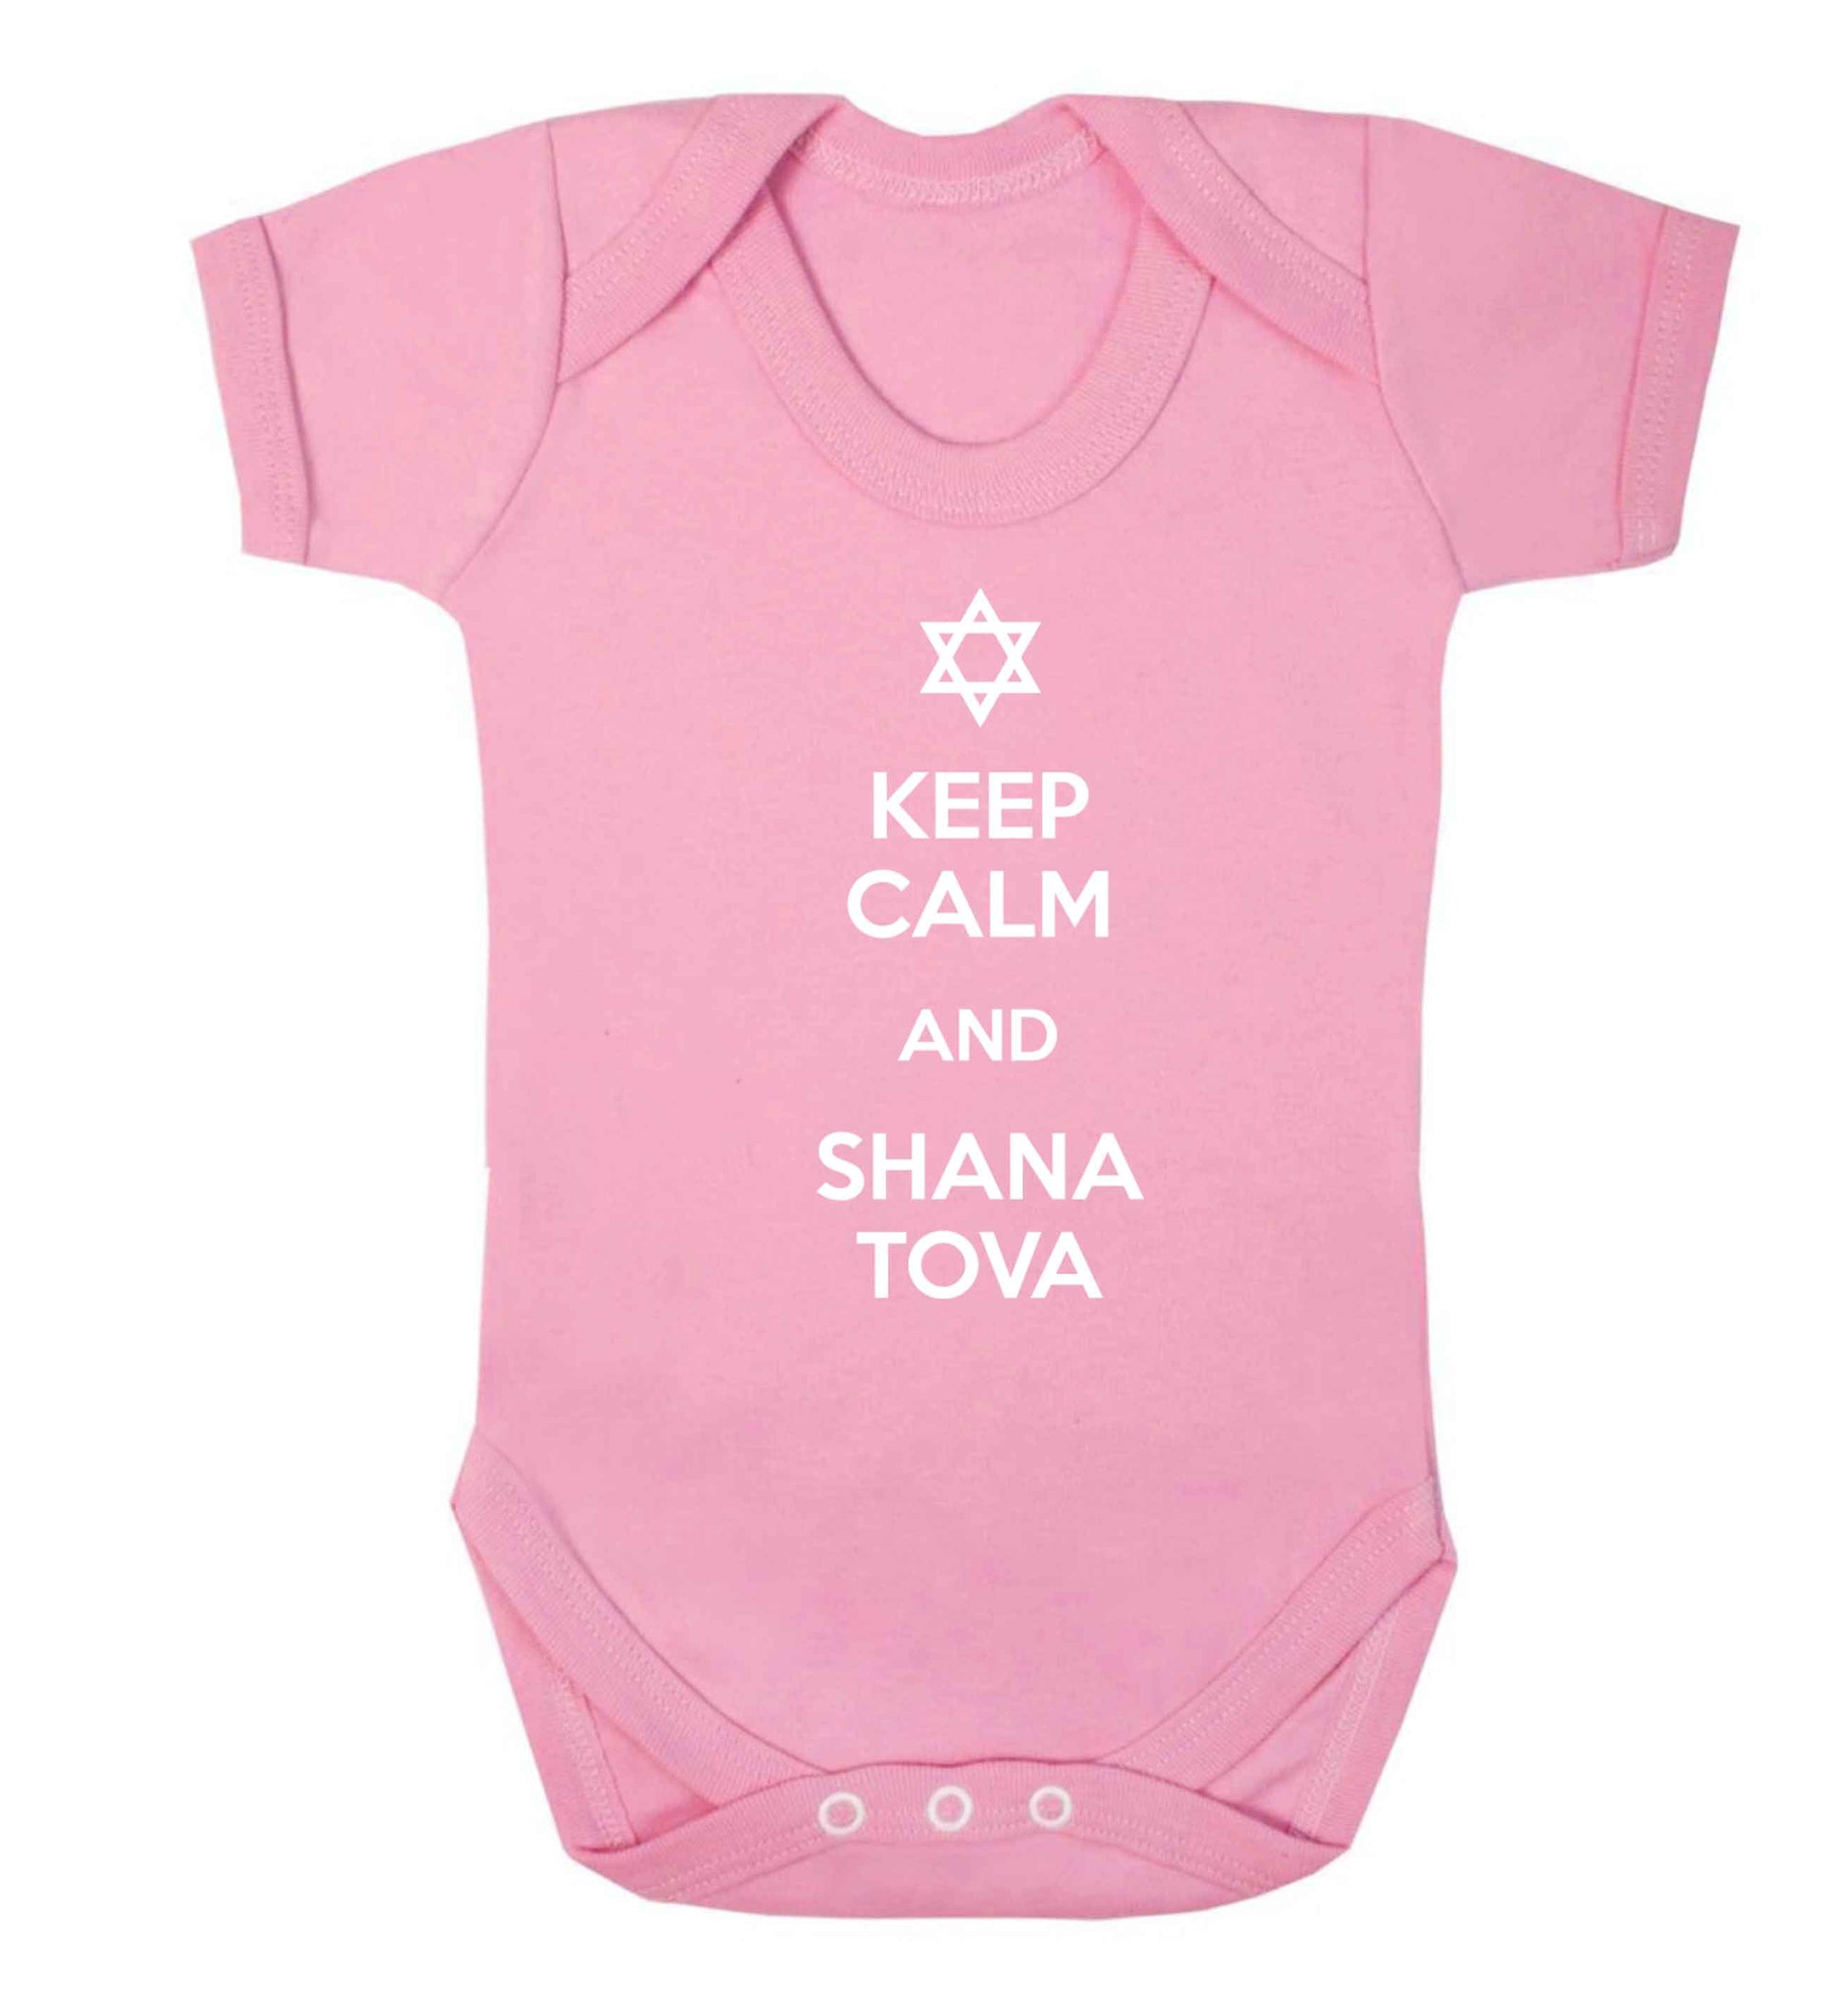 Keep calm and shana tova Baby Vest pale pink 18-24 months